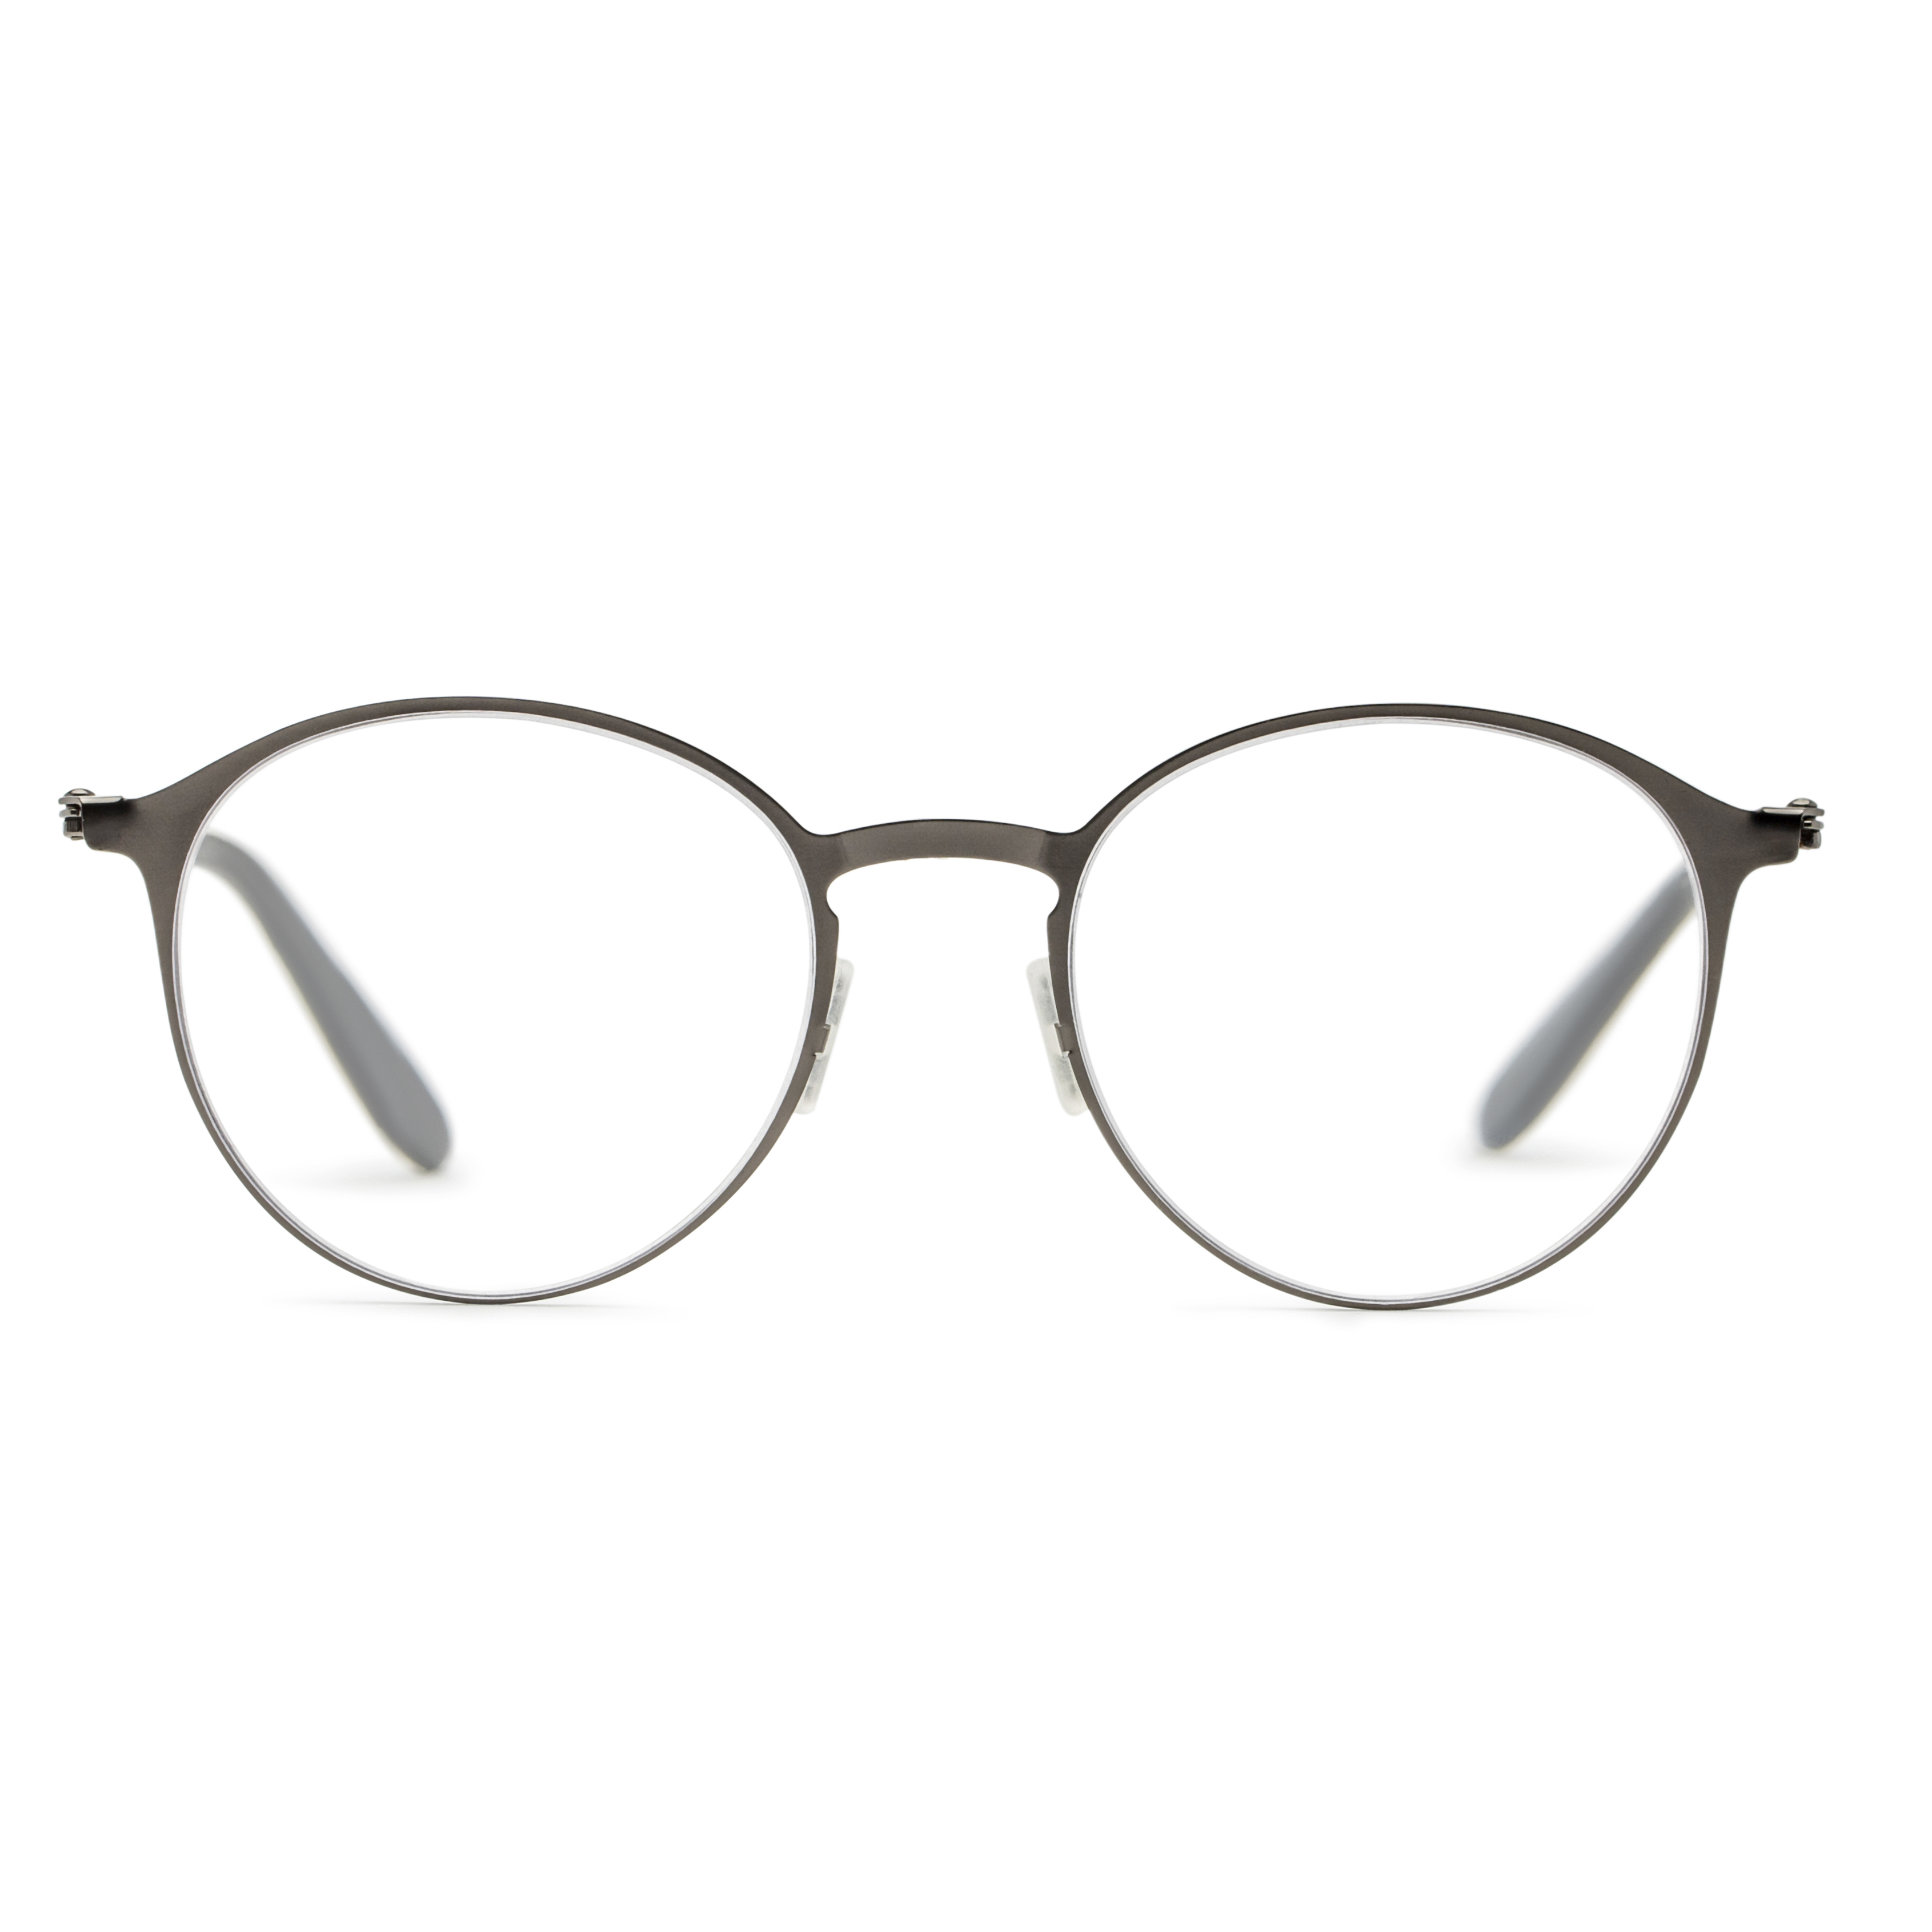 Unisex Round Sunglasses In Gunmetal With Clear Lenses By Foster Grant - Hayden Super Flat